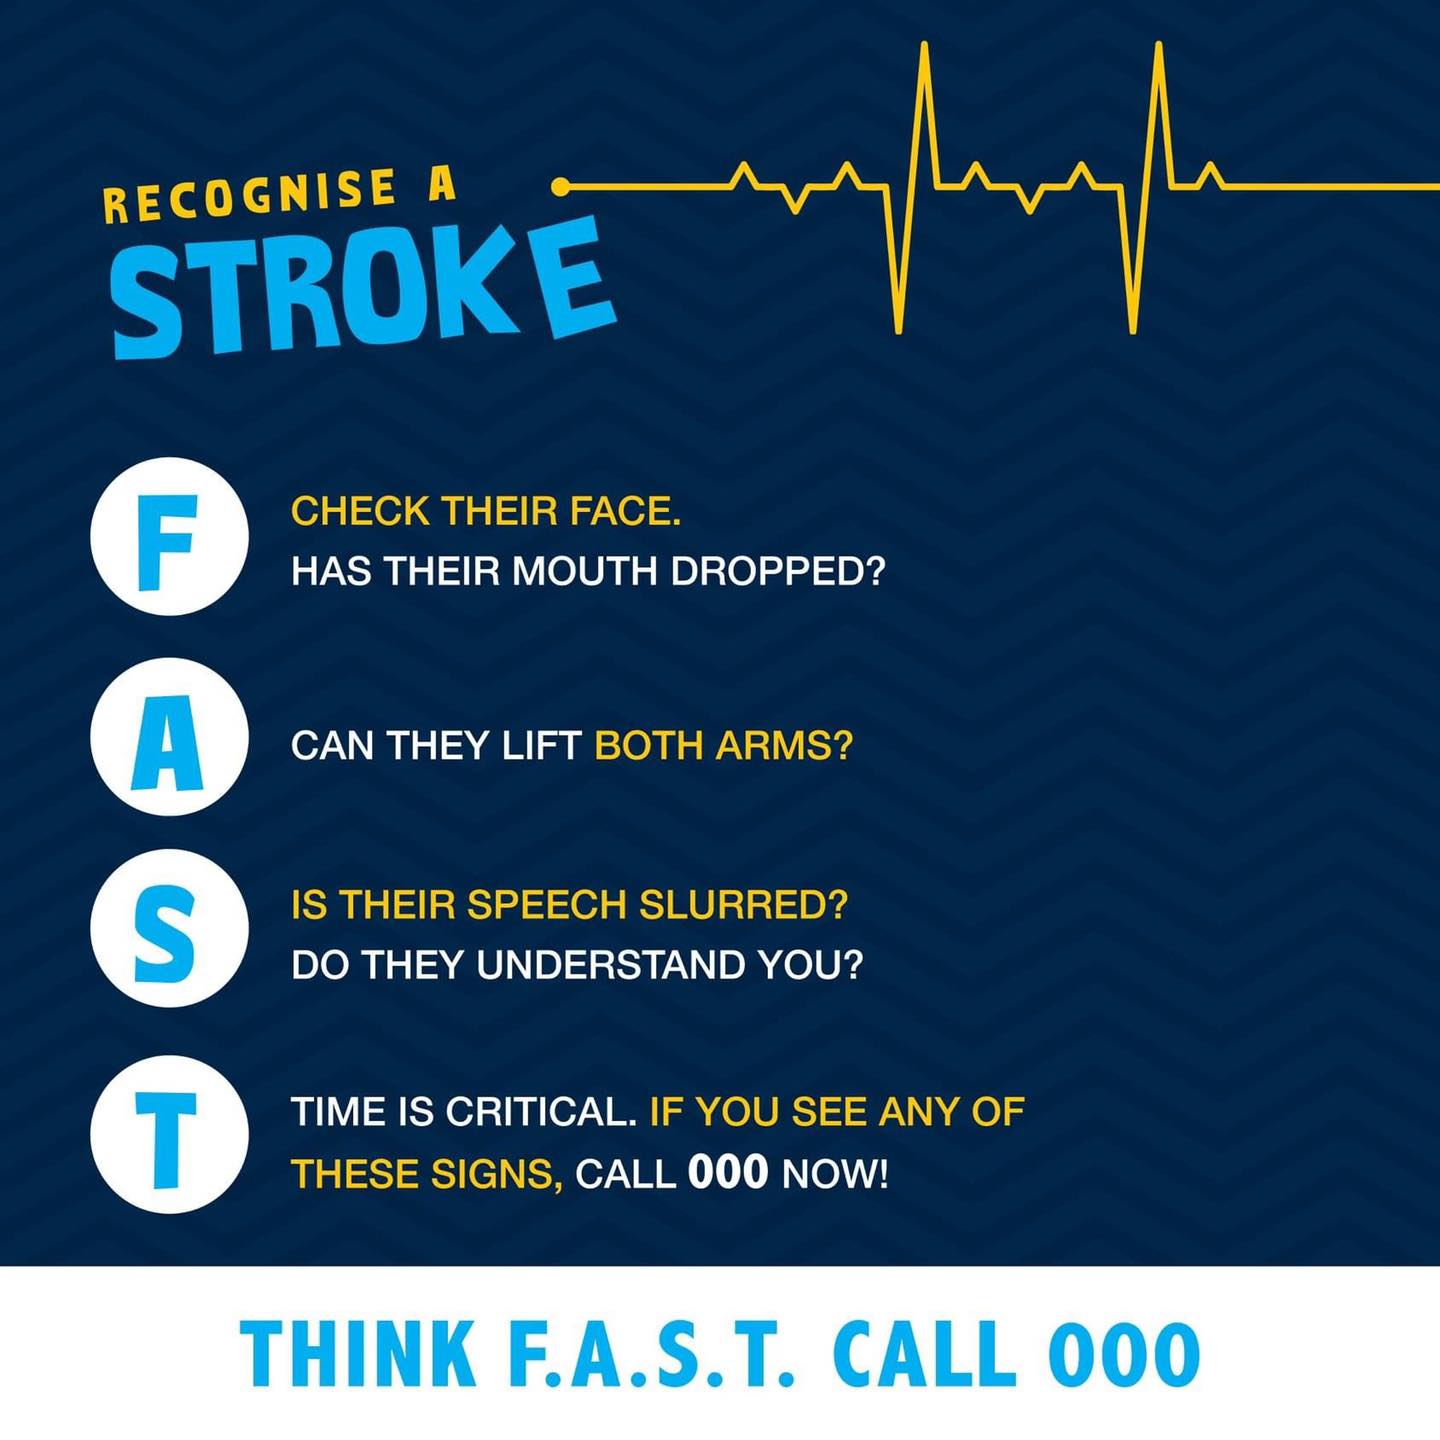 Recognise a Stroke